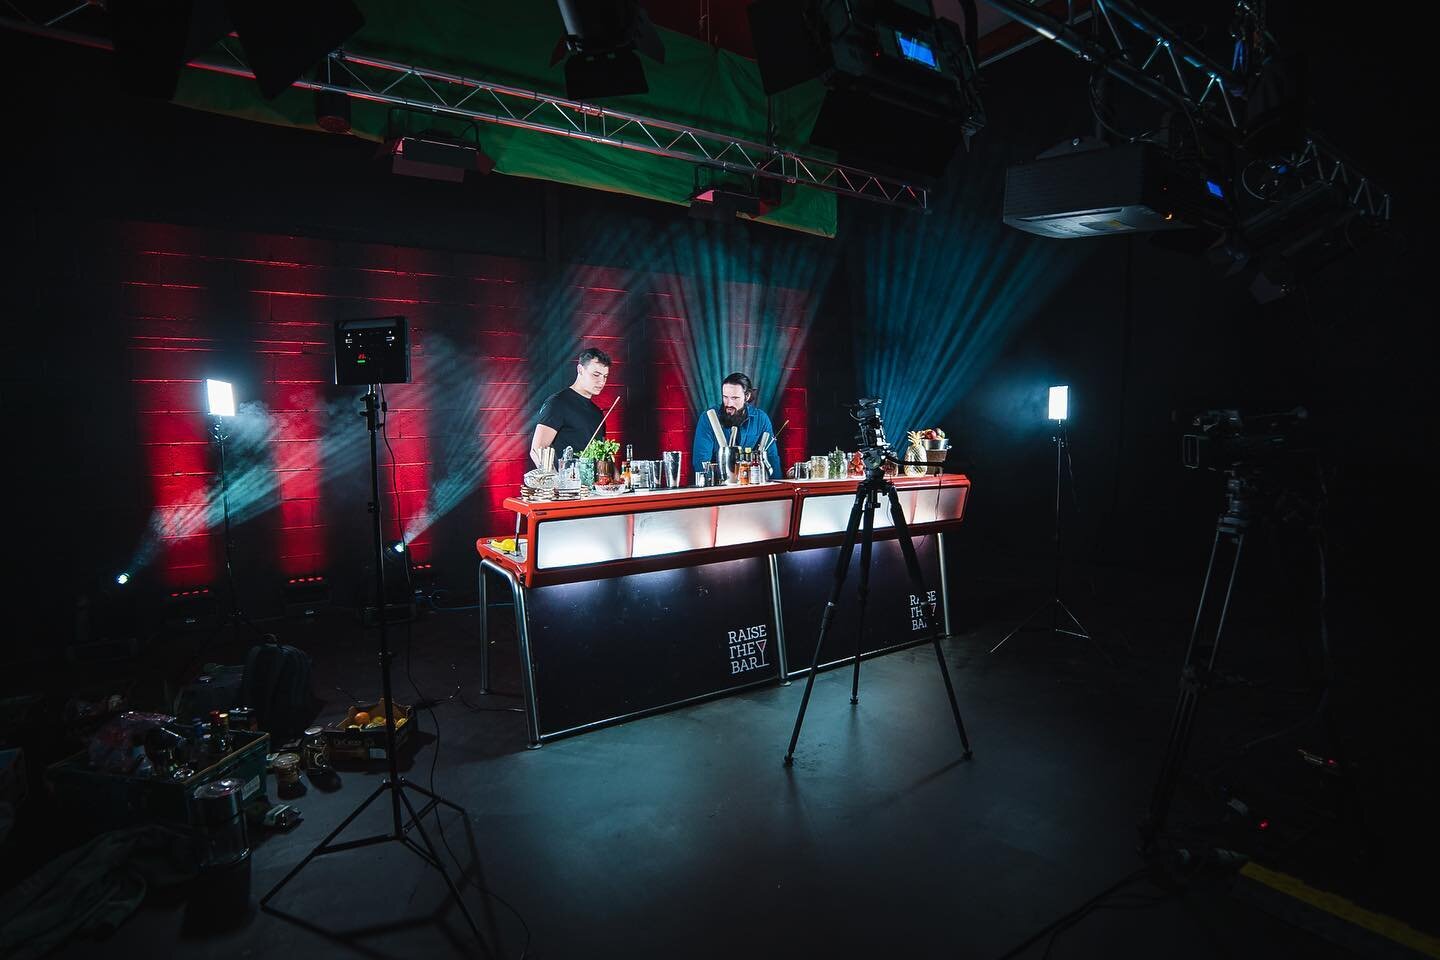 Check out our lighting design for a project with @raisethebarcocktails &amp; @cocktails_ontherock 🍹🍸🧉🍷 This was a lot of fun to set up and film! Head over to Raise the Bar to watch the videos 😎
.
.
#Studio1 #Studio1iom #raisethebar #cocktails #t